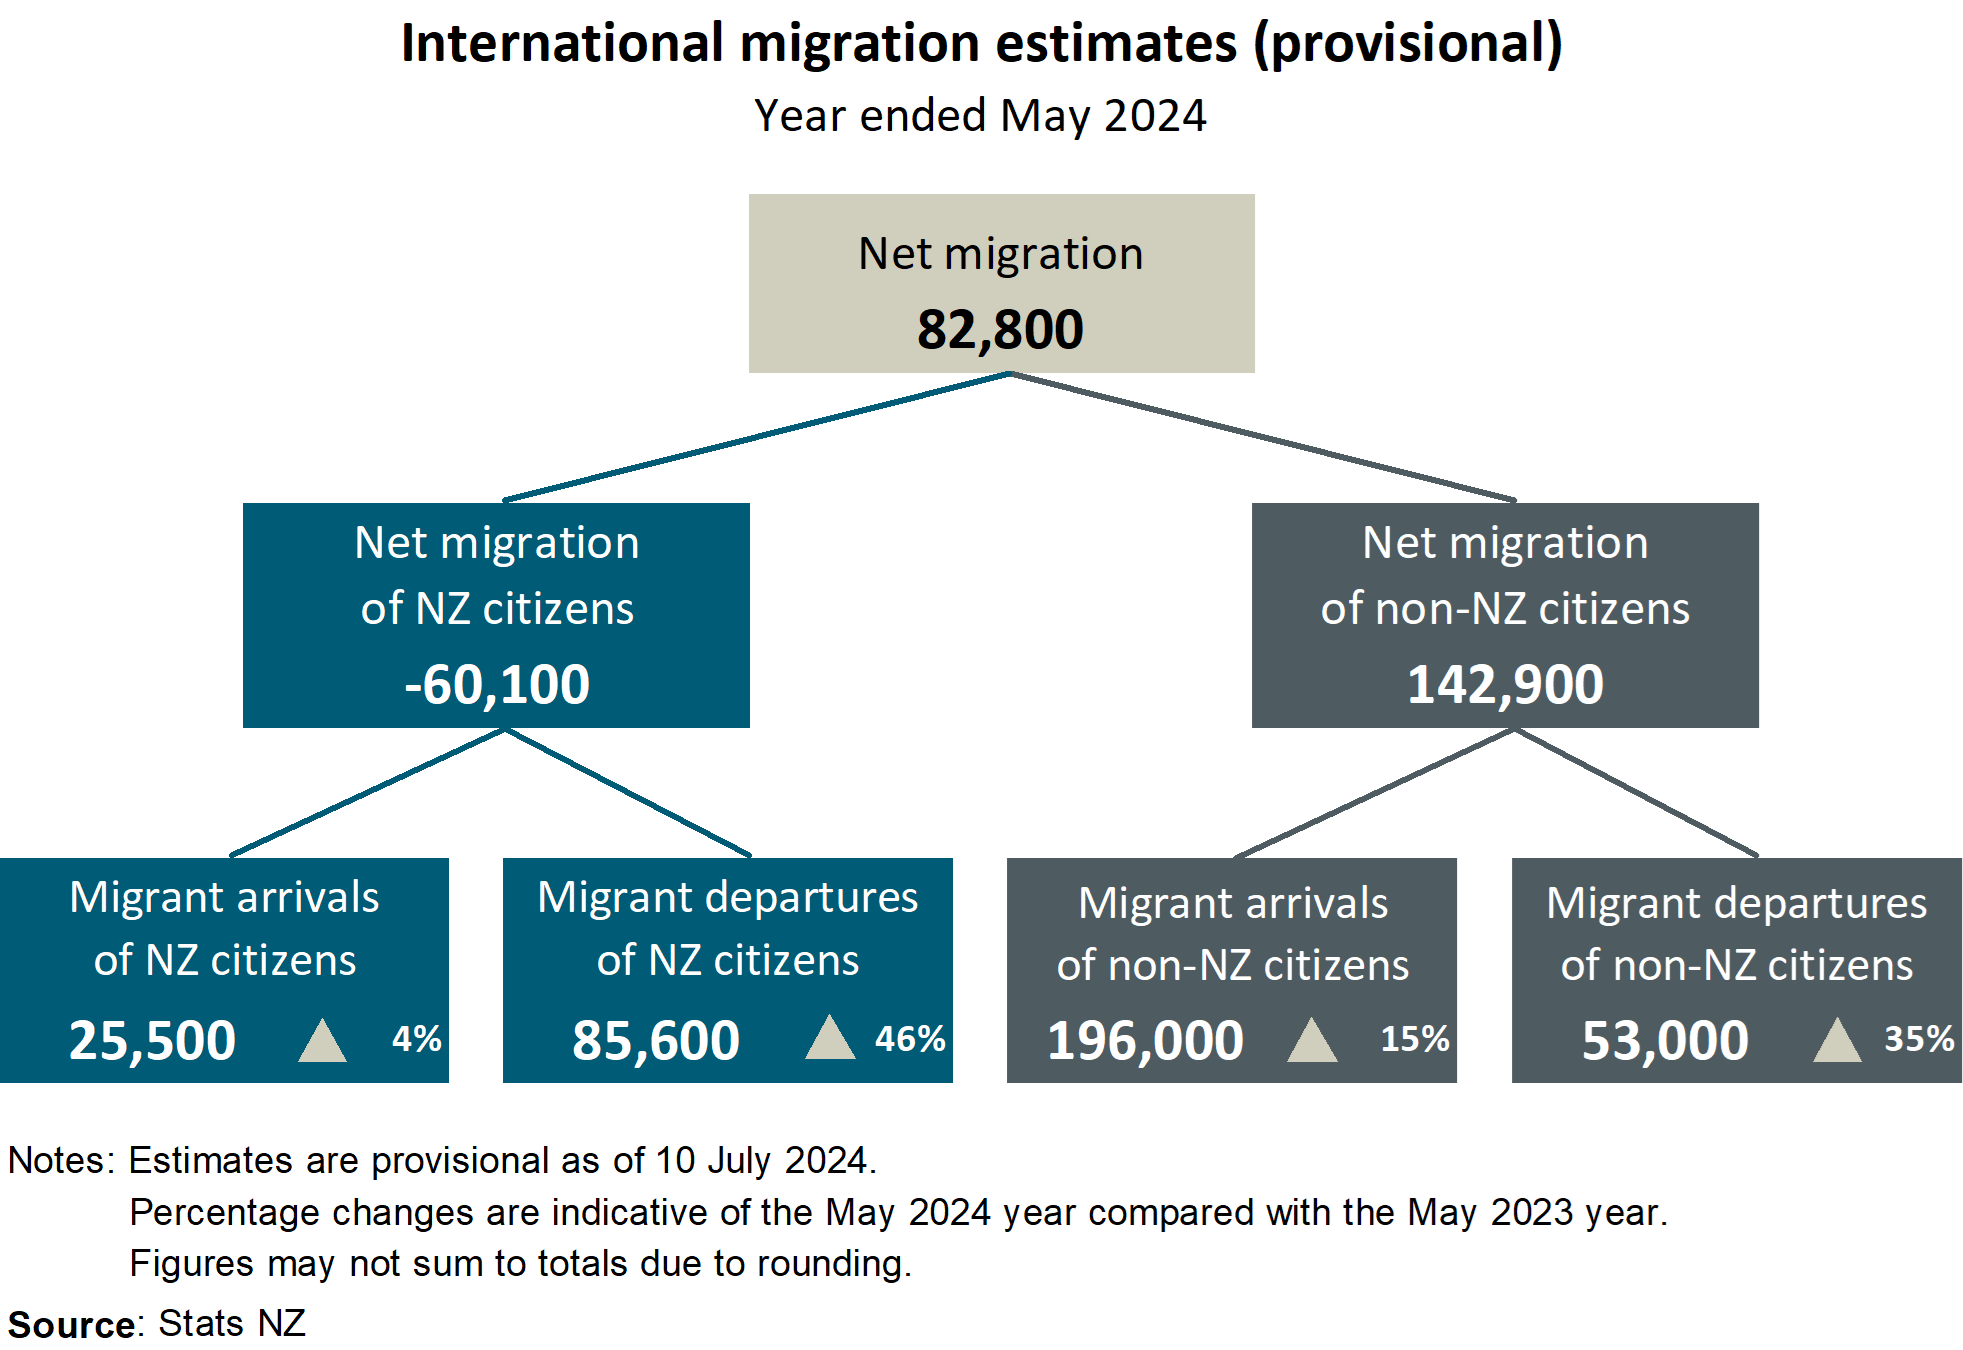 Flowchart, International migration estimates (provisional), year ended May 2024. See link to text alternative under image.